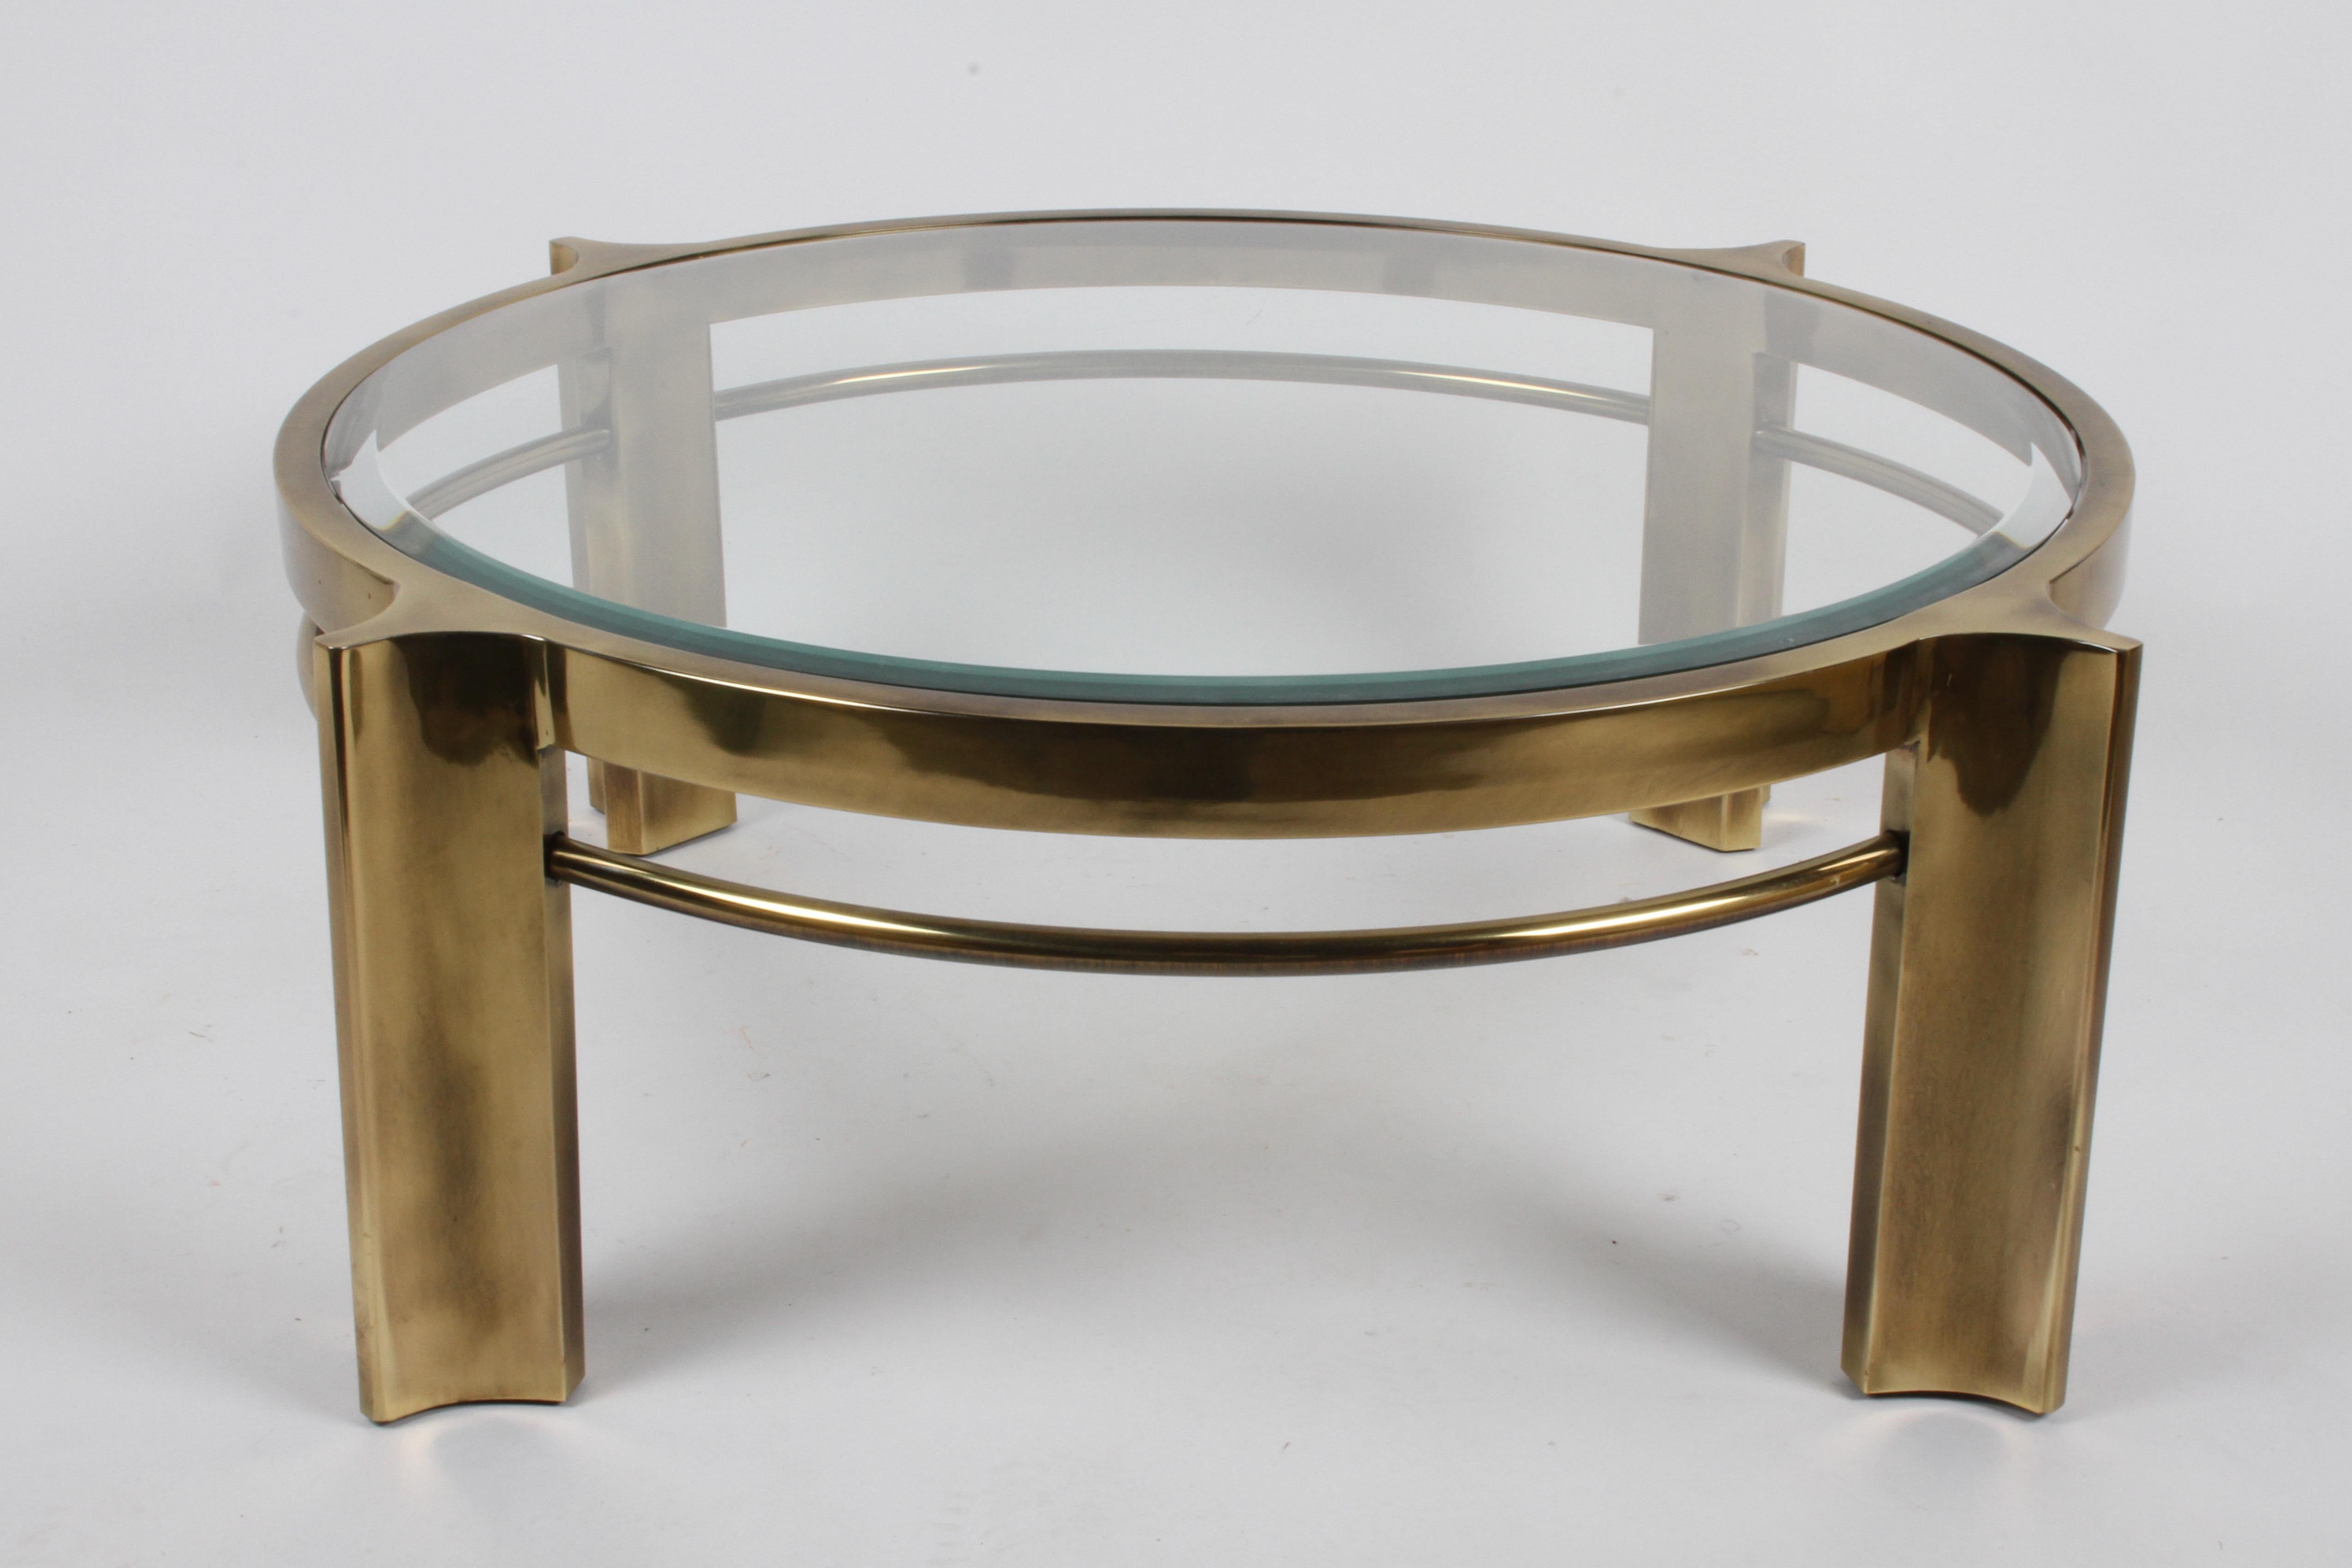 Rarely seen round coffee table by Mastercraft with glass bevel edge top on brass frame. The four legs are based off their 